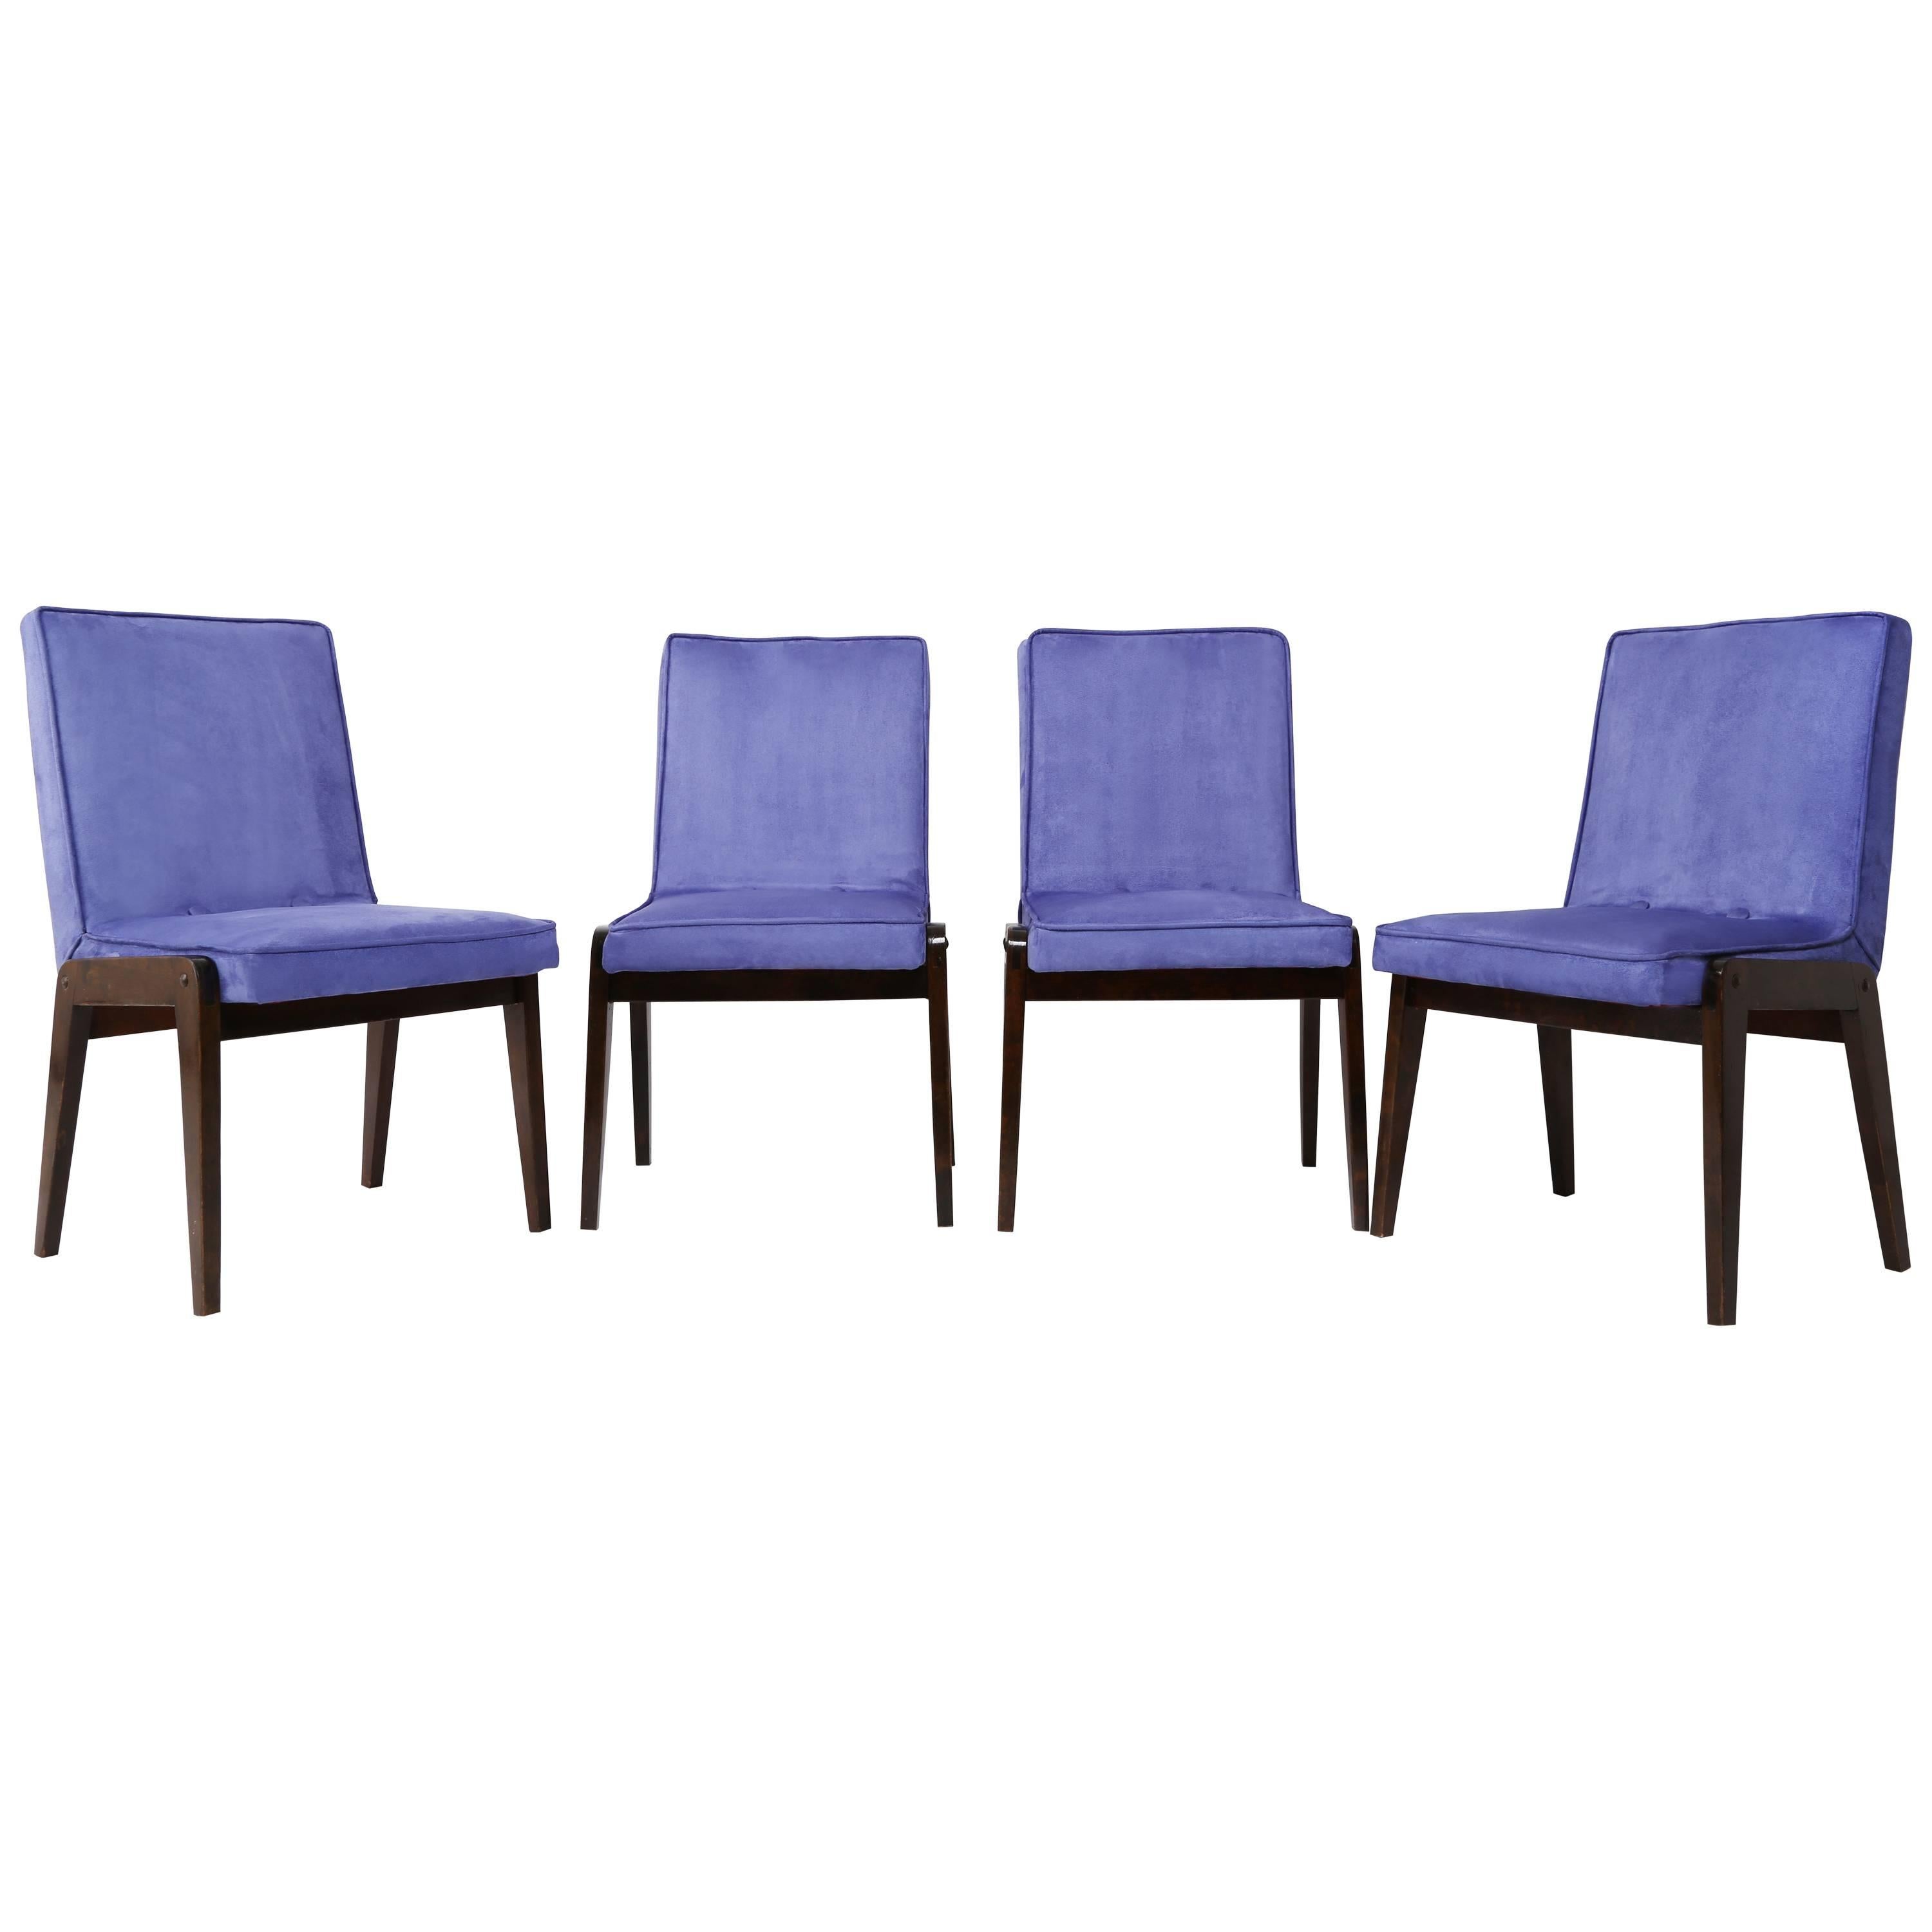 Set of Four Mid Century Mini Aga Pantone Ultra Violet Chairs, Europe, 1960s For Sale